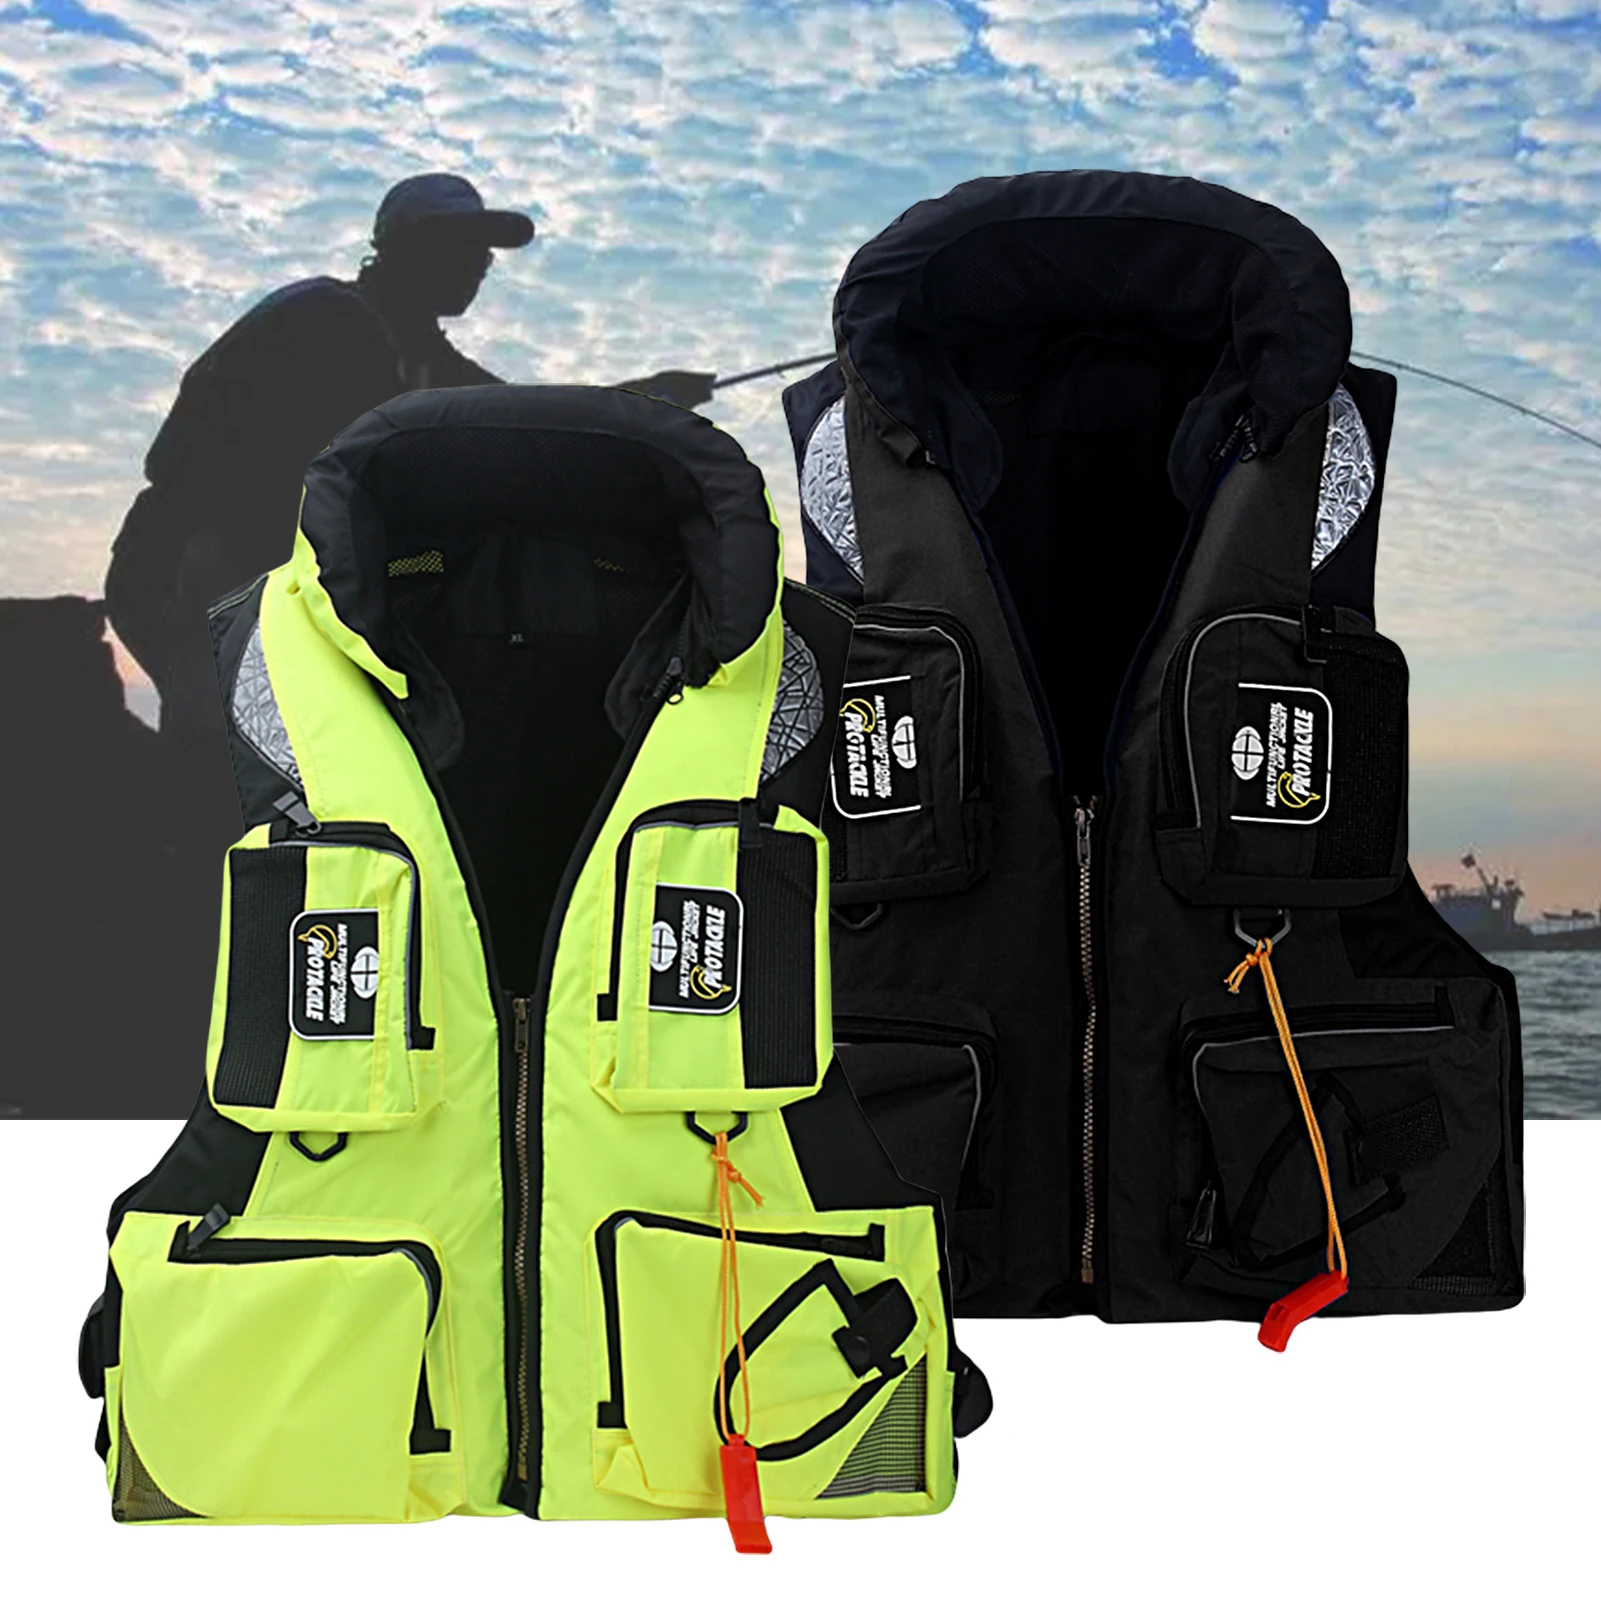 https://ae01.alicdn.com/kf/S69178e8b99ed4112a4426a5d792fbfabo/Versatile-Comfortable-Detachable-High-Men-Water-Sports-Safety-Swimming-Jacket-for-Drifting-Fishing-Life-Vest-Life.jpg